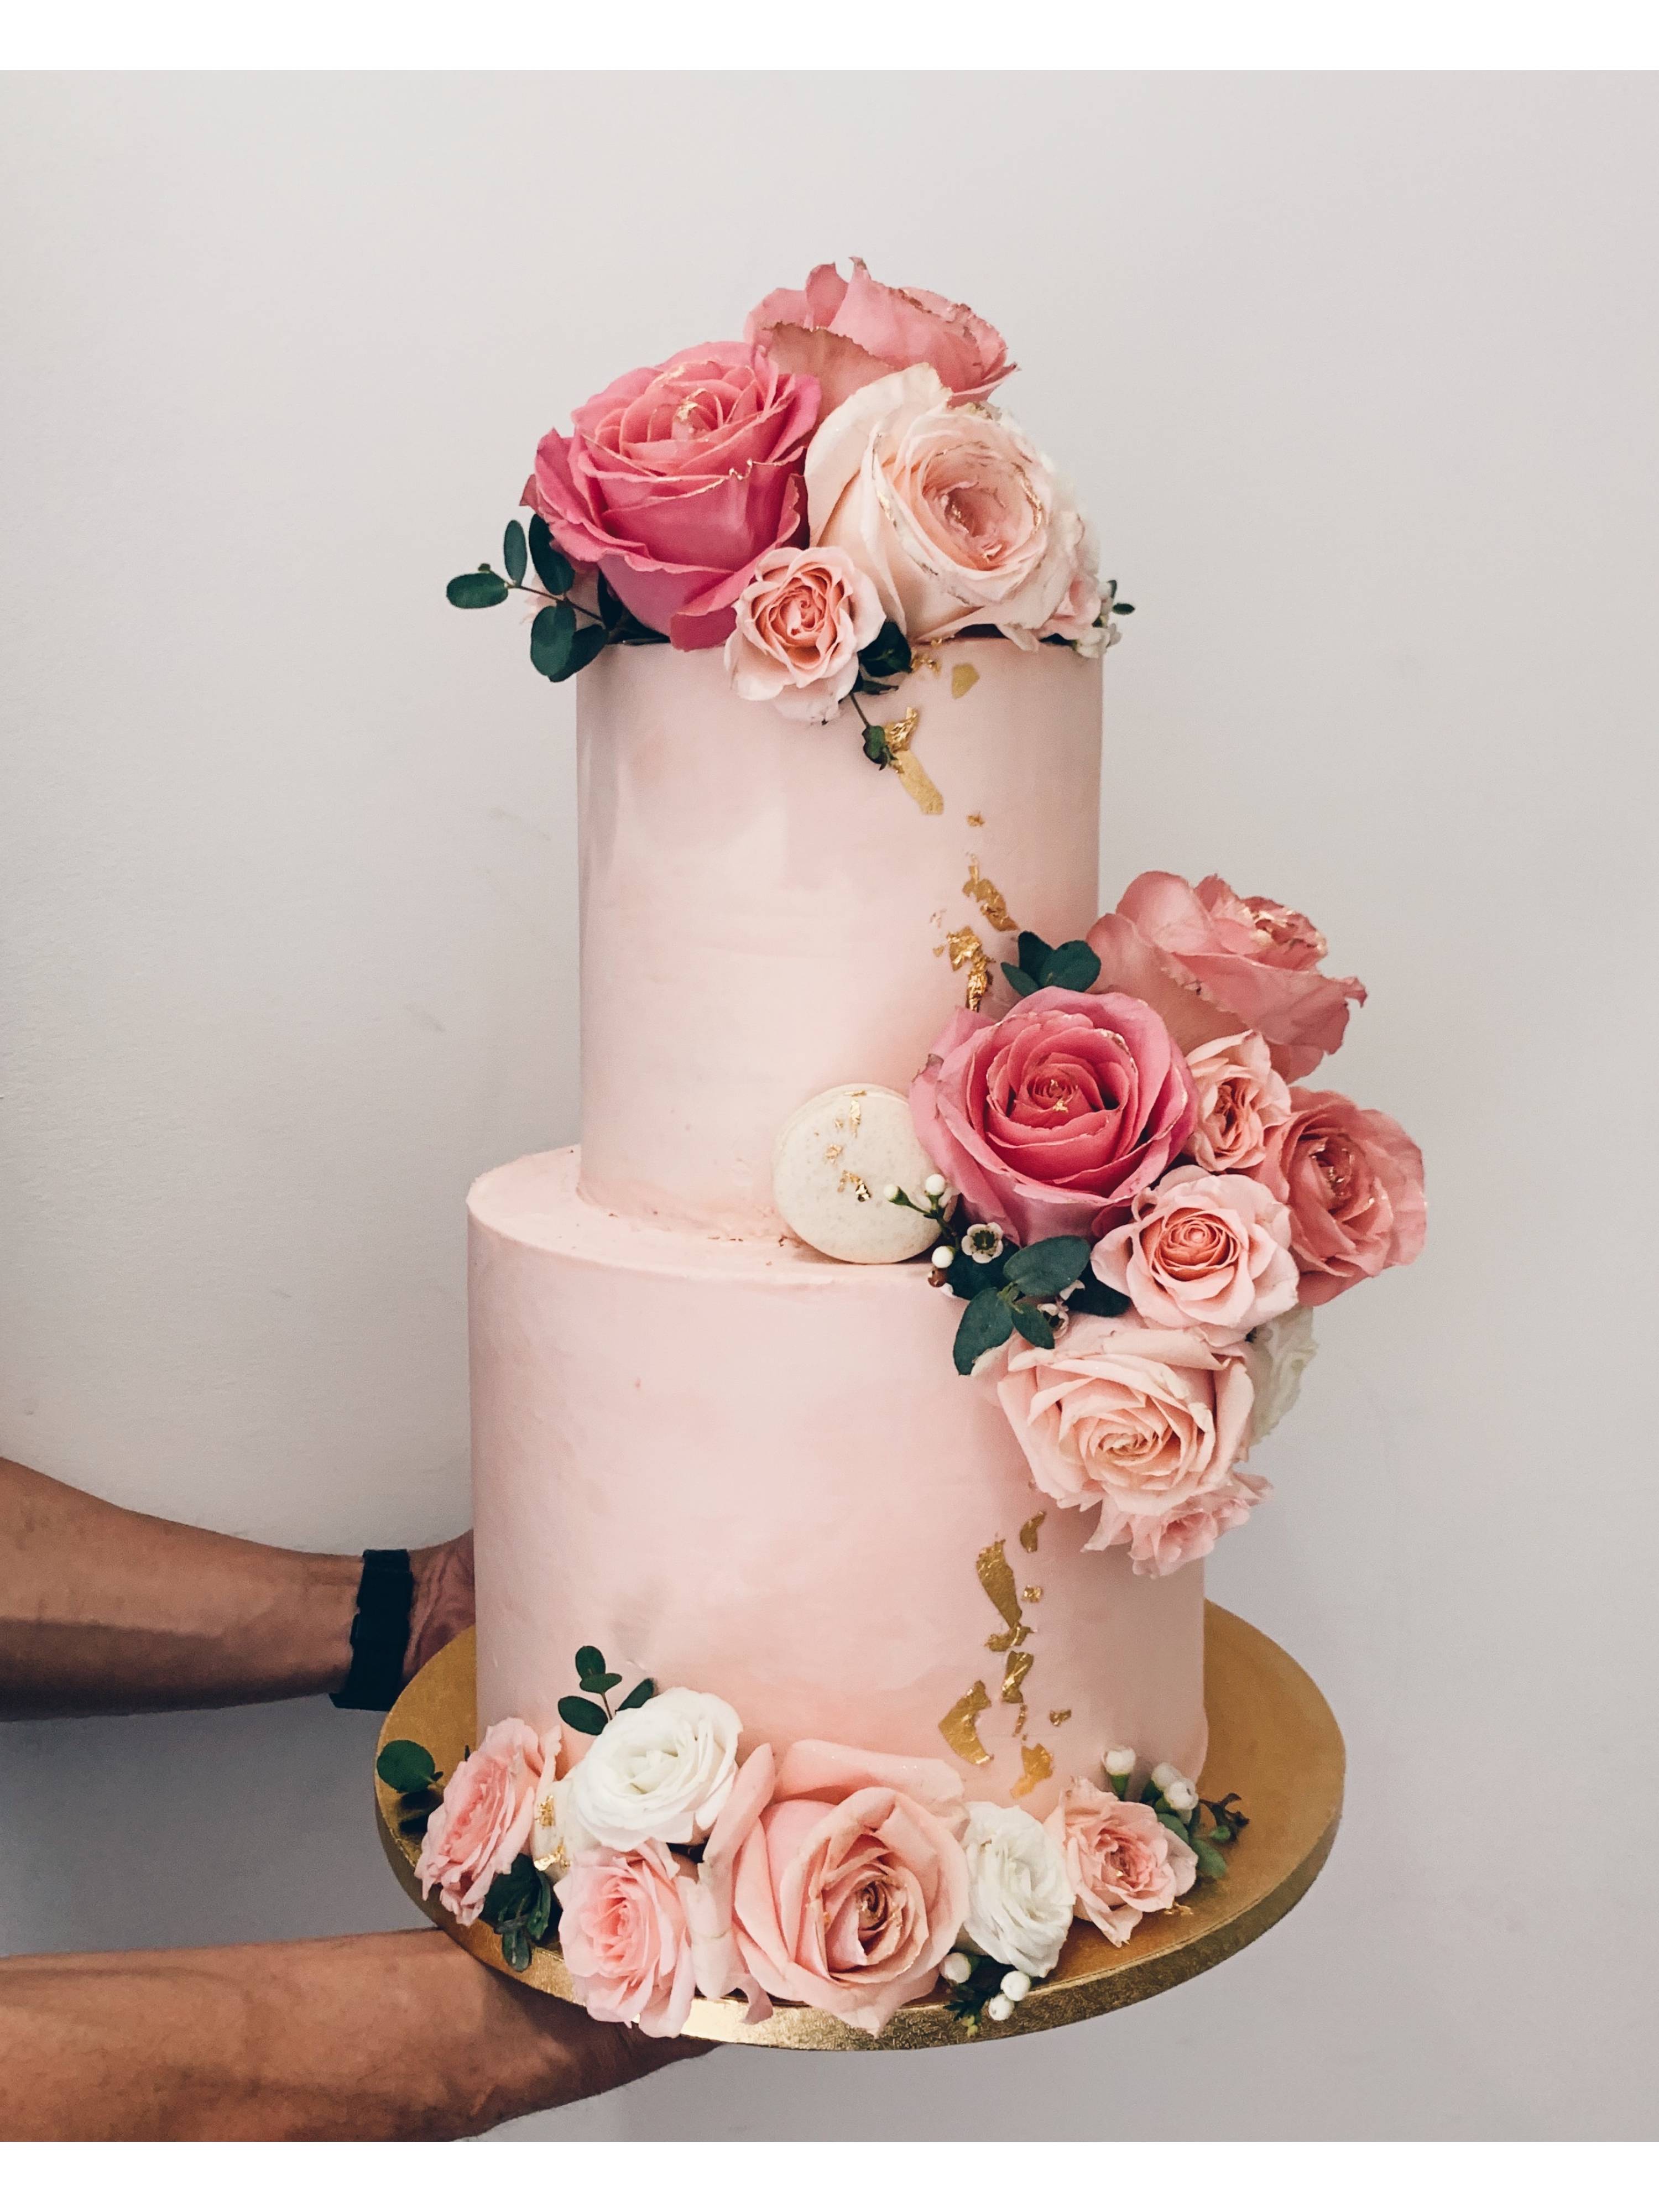 F49. Shades of Pink Floral Cake